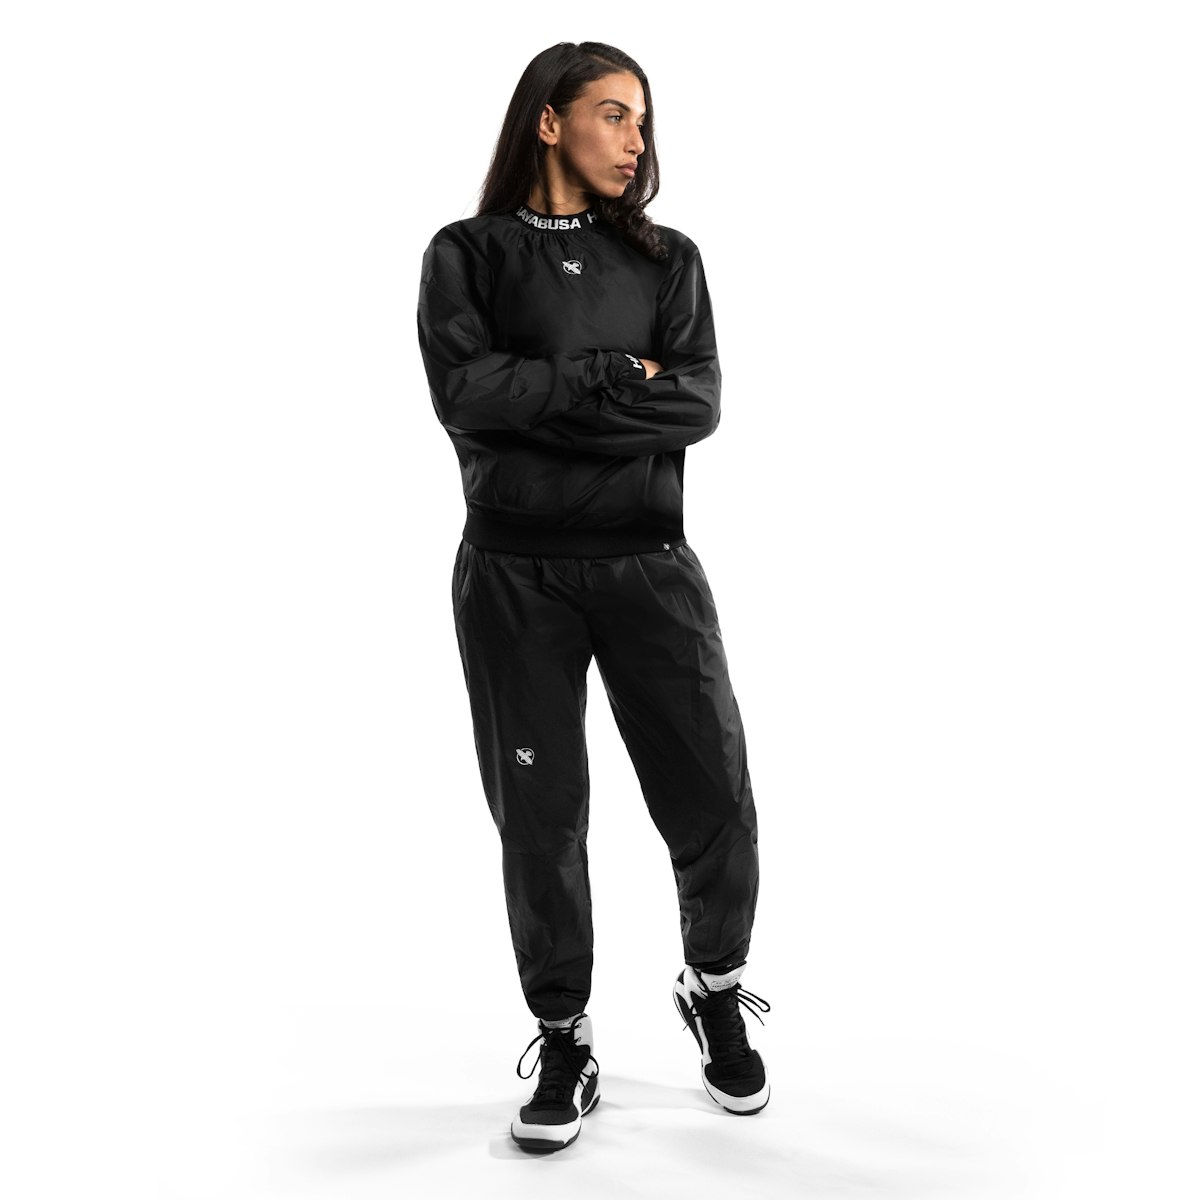 Warrior Sauna Suit - Sweat for Body Shaping and Weight Loss during Cardio  Fitness Exercise Training